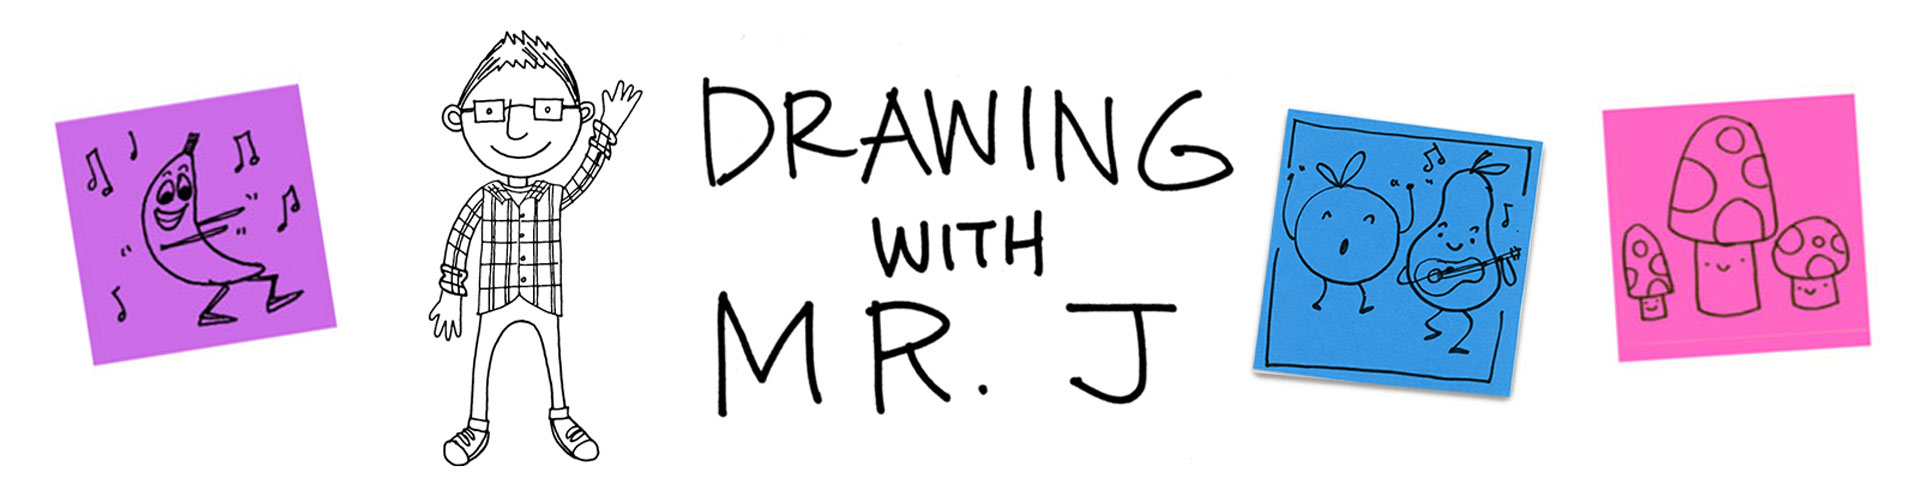 Drawing With Mr. J